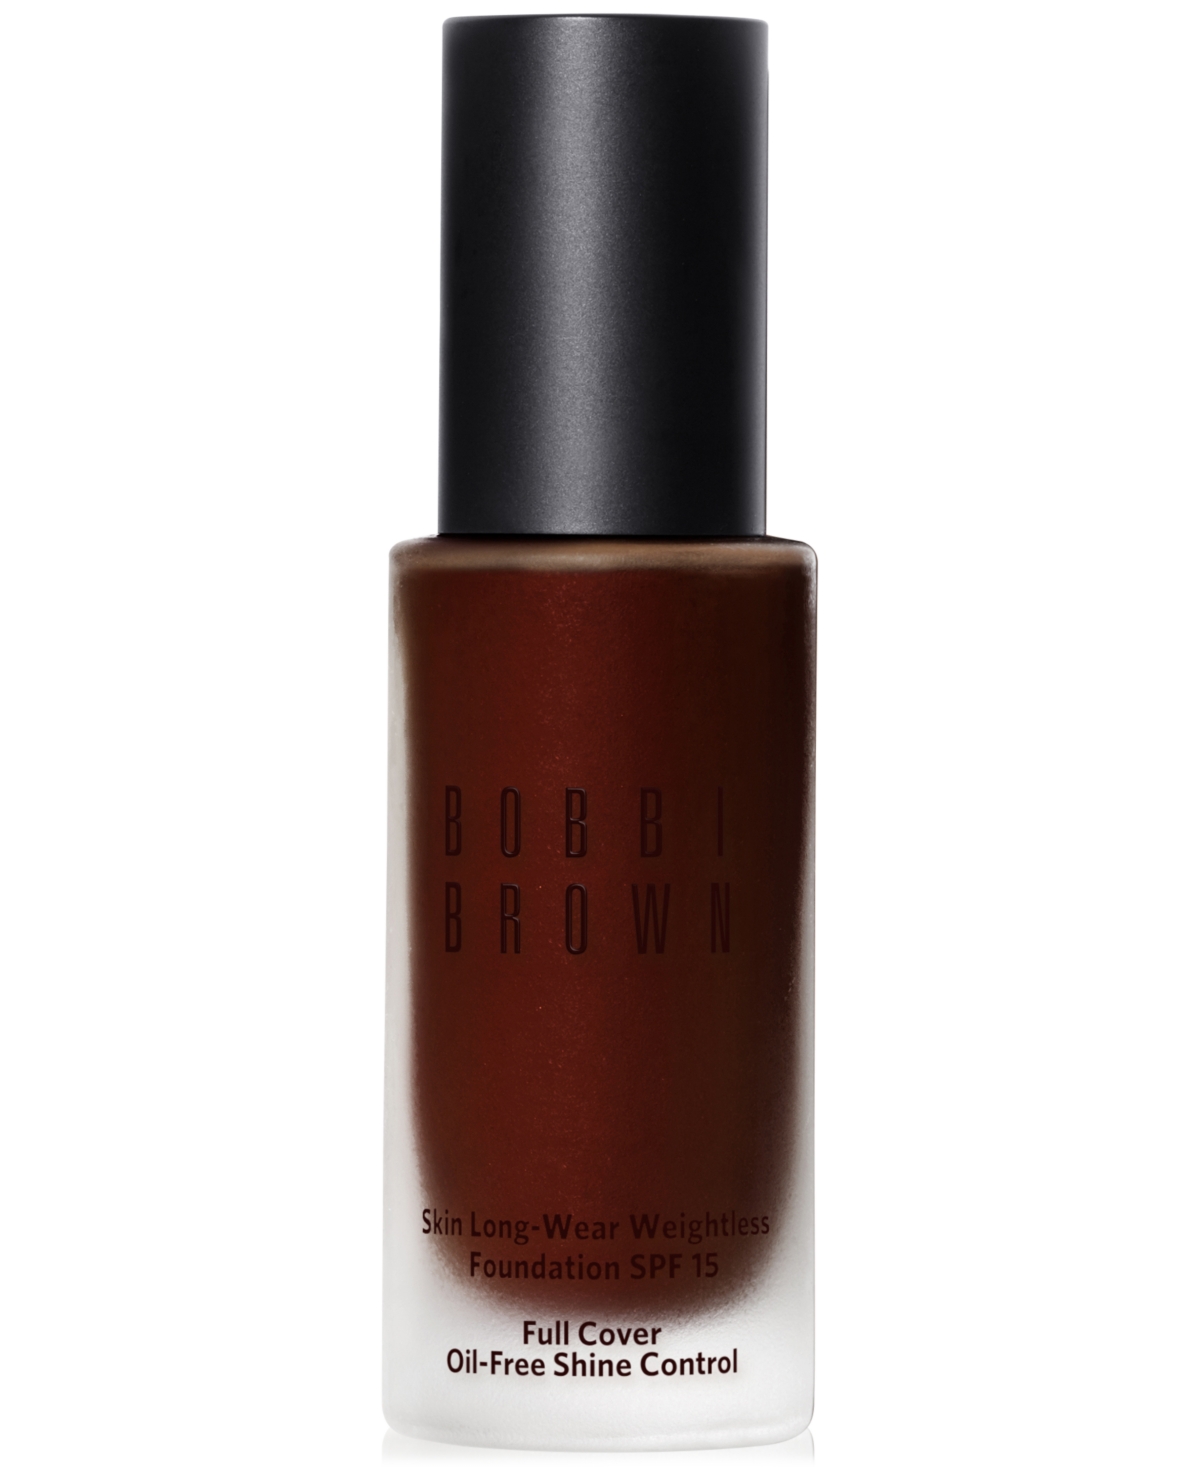 Bobbi Brown Skin Long-wear Weightless Foundation Spf 15, 1-oz. In Espresso (n-) Deepest Brown With Red,bro